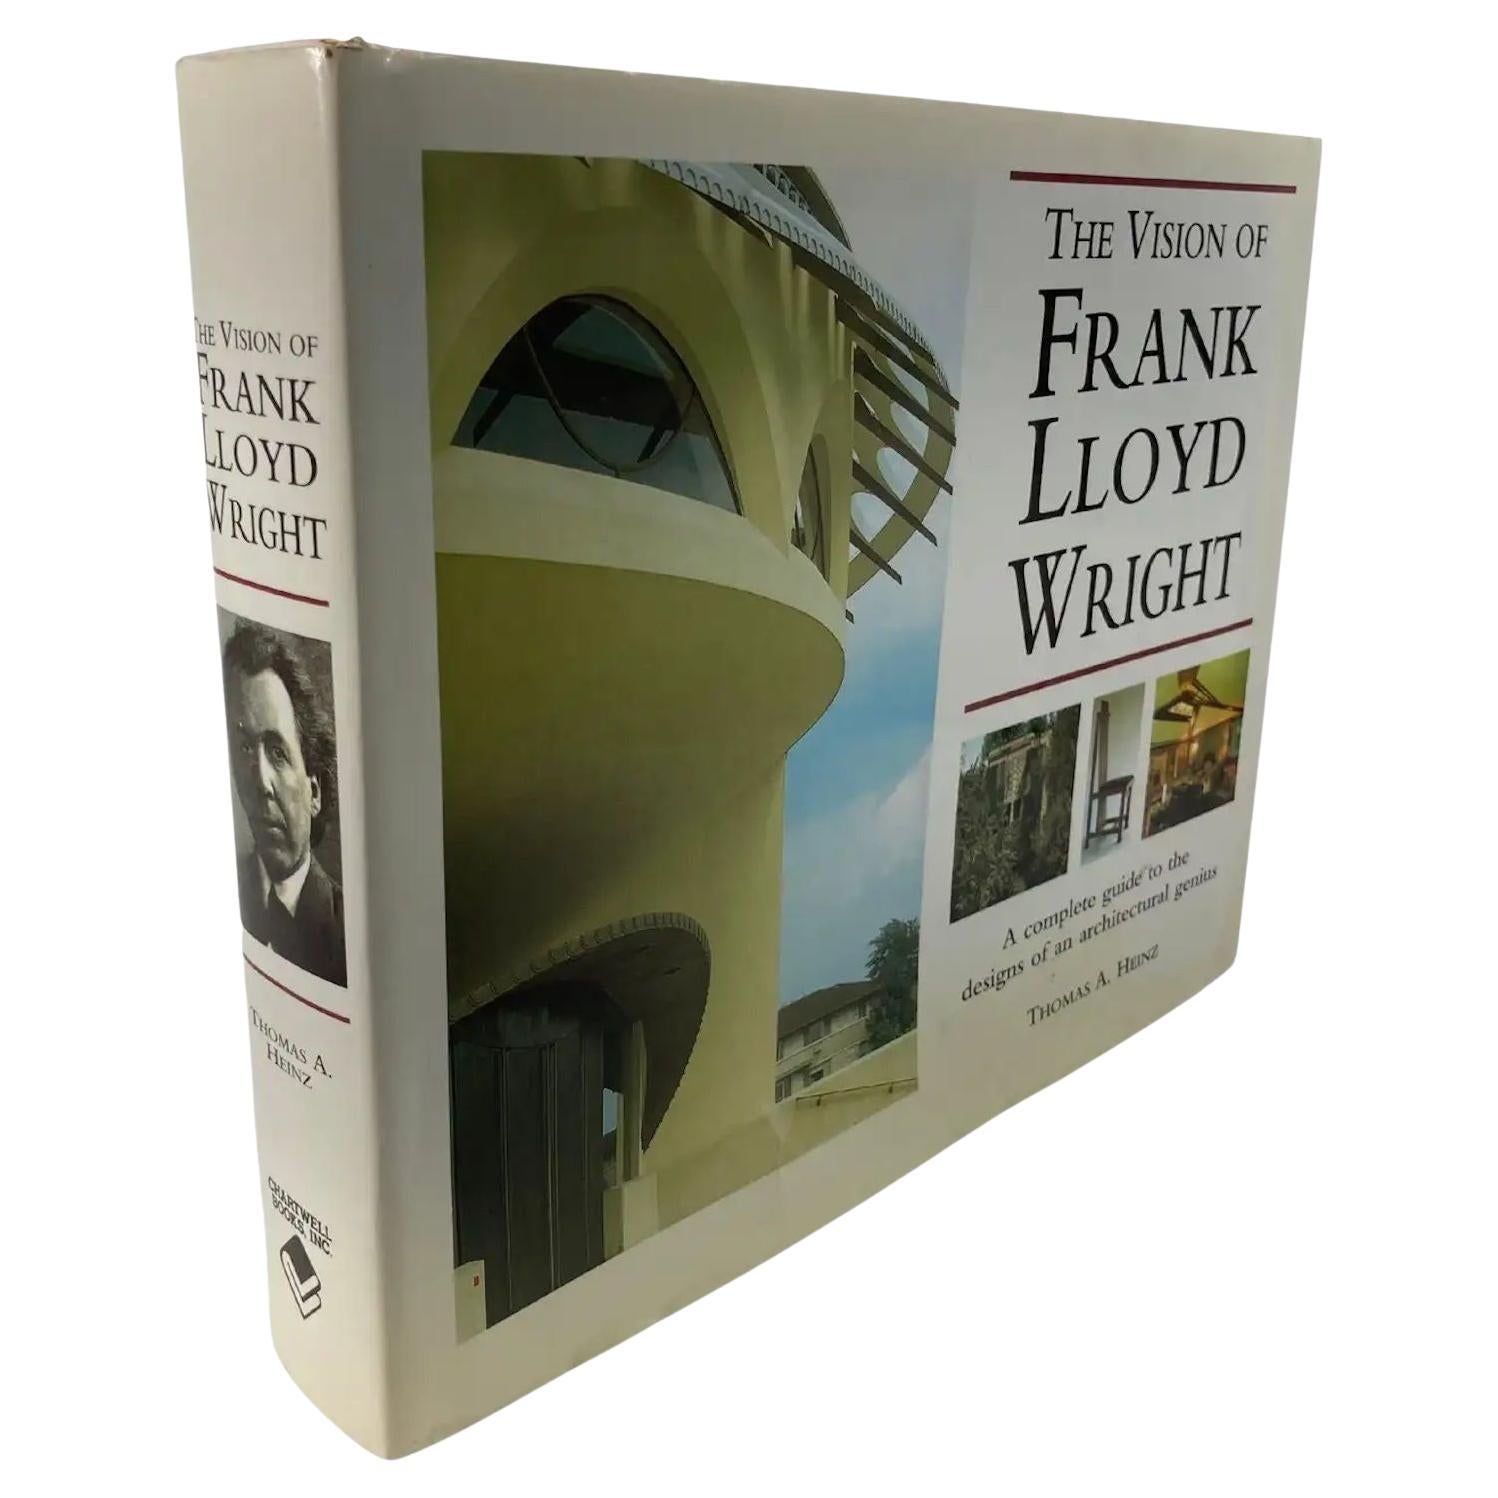 Vision of Frank Lloyd Wright by Thomas a. Heinz Hardcover Book 1st Edition For Sale